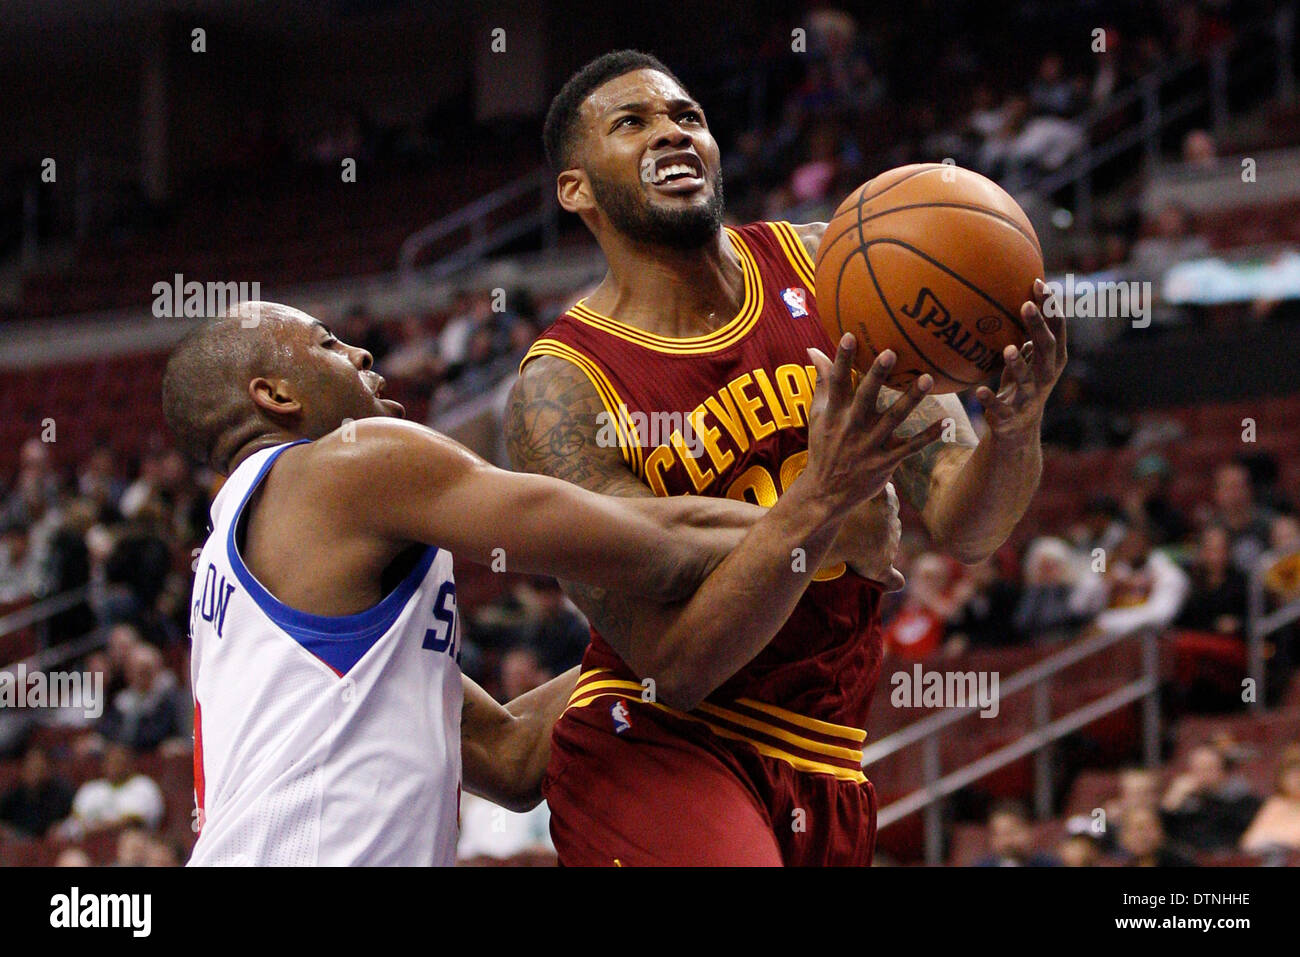 Cleveland cavaliers hi-res stock photography and images - Alamy